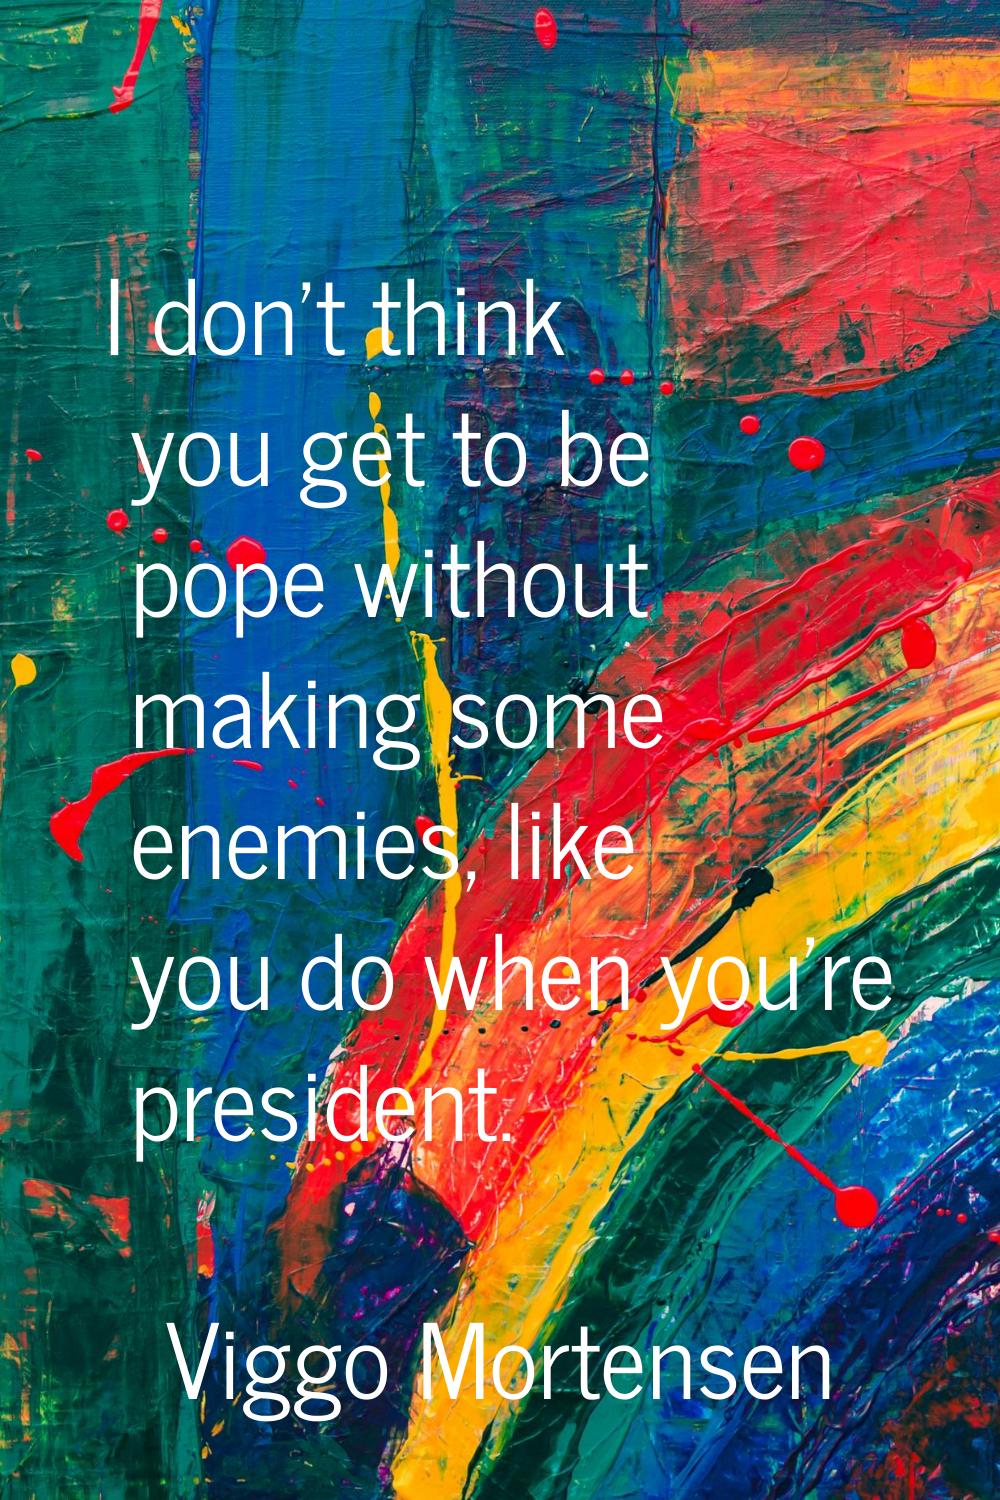 I don't think you get to be pope without making some enemies, like you do when you're president.